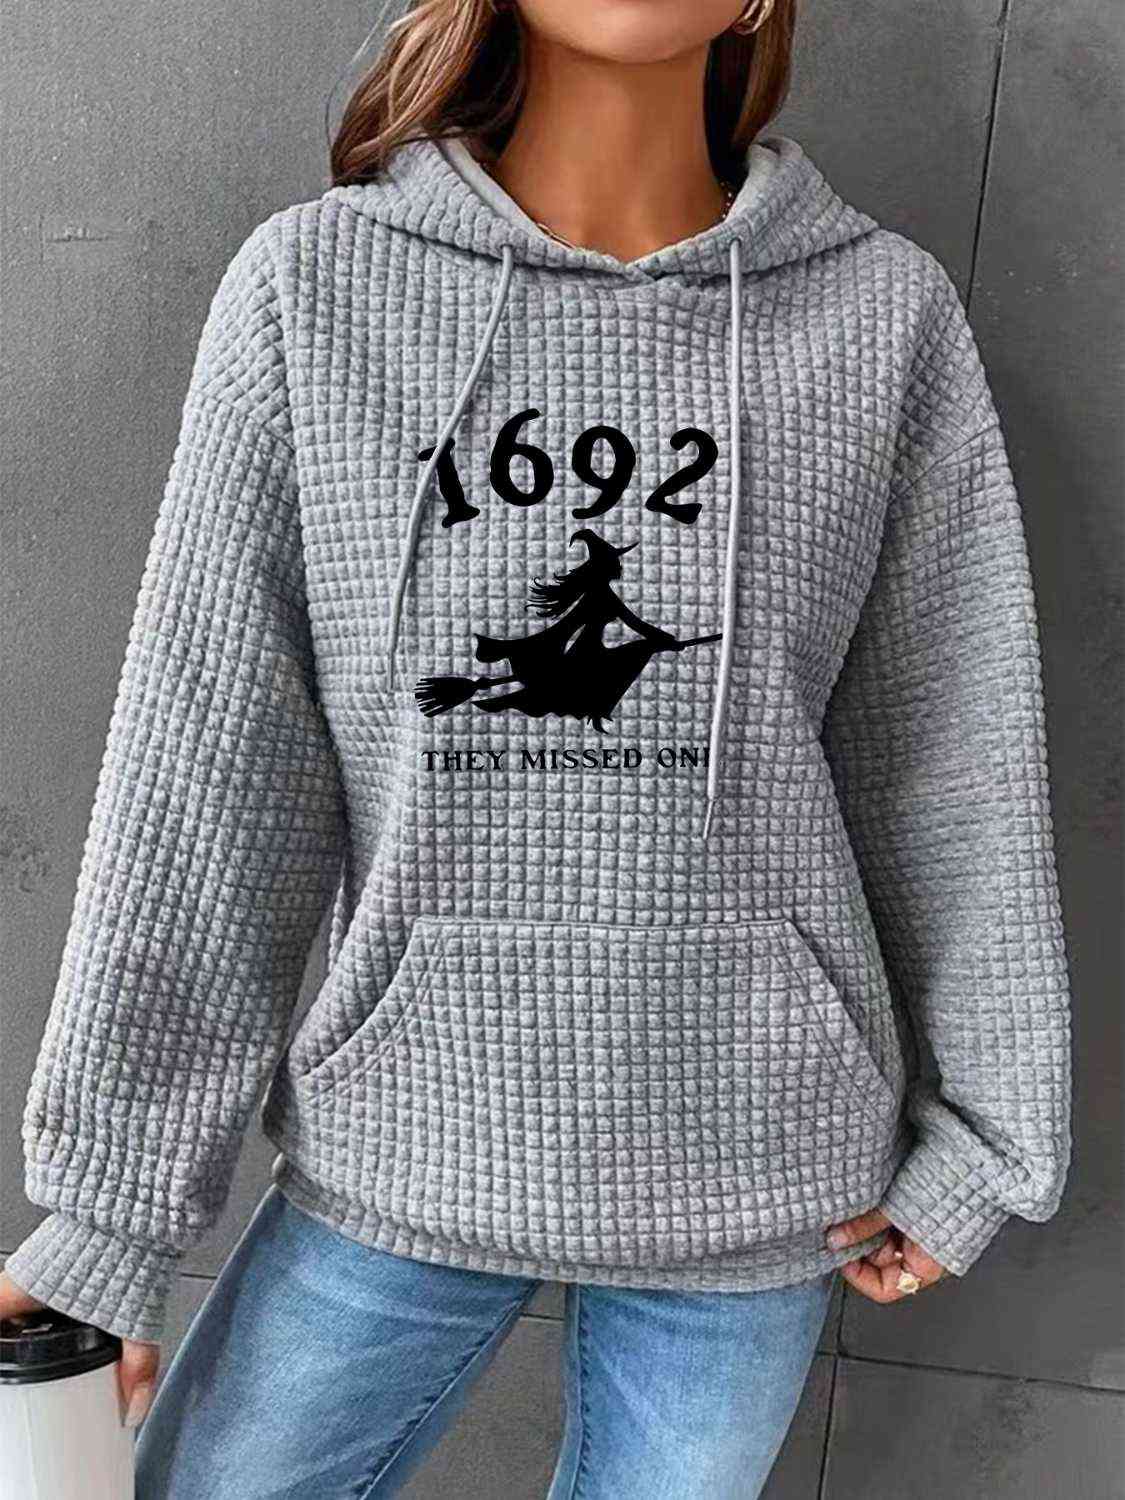 1962 THEY MISSED ONE Graphic Hoodie with Front Pocket BLUE ZONE PLANET